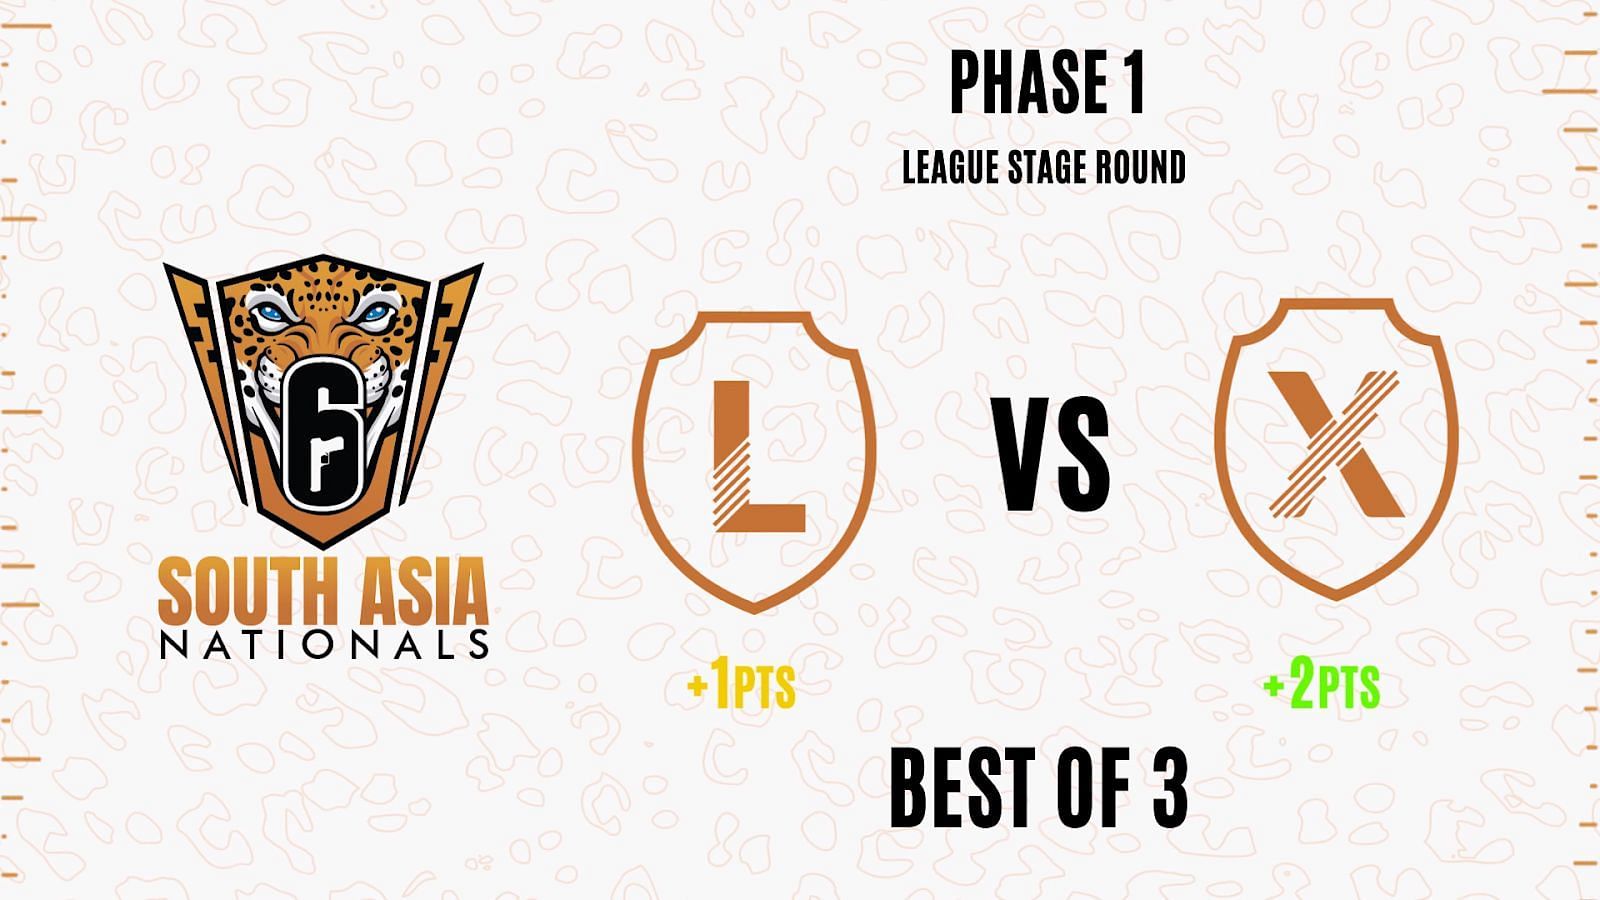 How the point system will work for South Asia Nationals Playoffs (Image via The Esports Club)